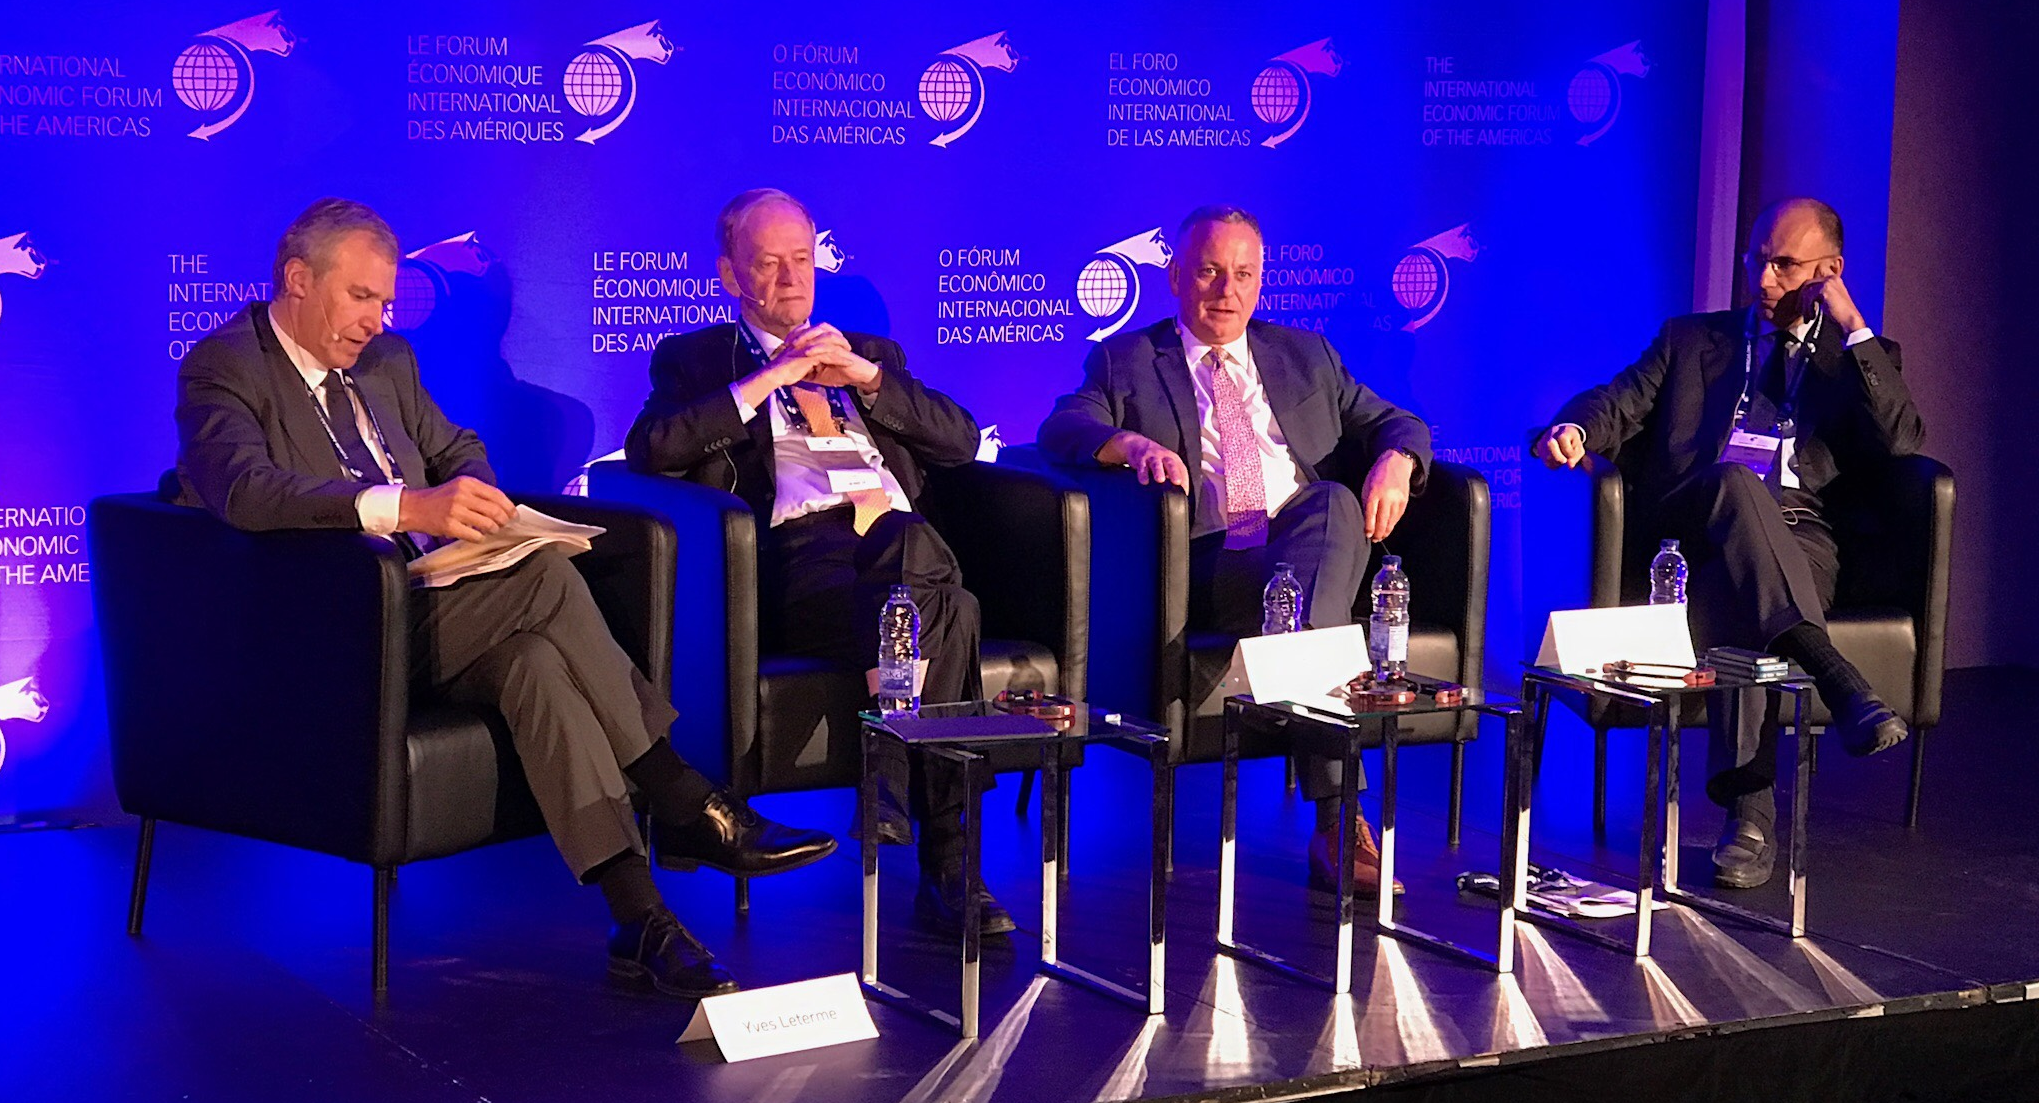 Panel moderated by Yves Leterme, with former Prime Minister of Canada Jean Chretien, former First Minister of Scotland, Lord Jack McConnell and former Prime Minister of Italy, Enrico Letta.